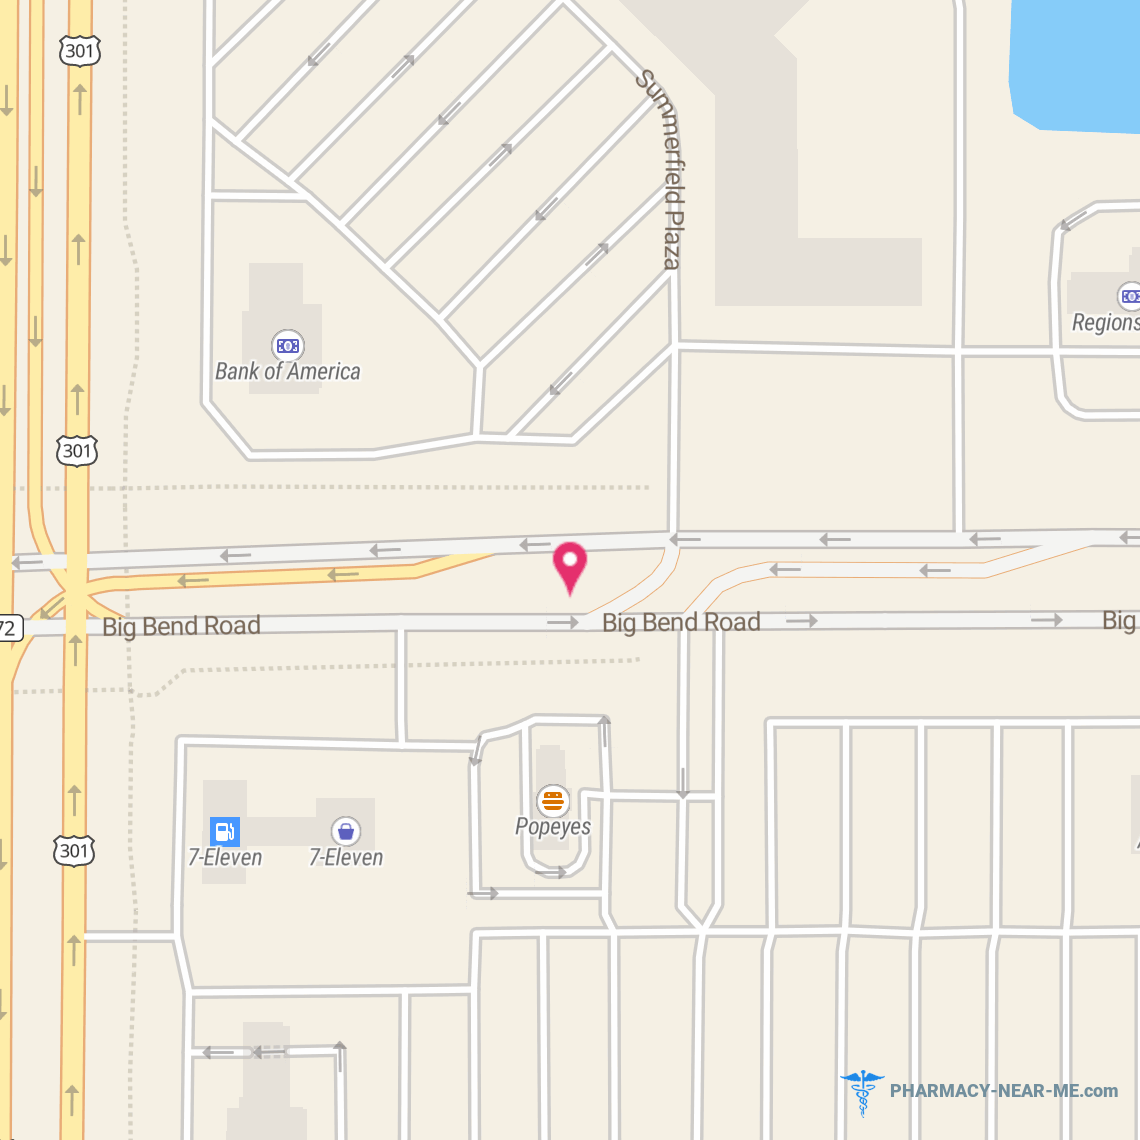 WALGREENS #09297 - Pharmacy Hours, Phone, Reviews & Information: 10427 Big Bend Road, Riverview, Florida 33578, United States